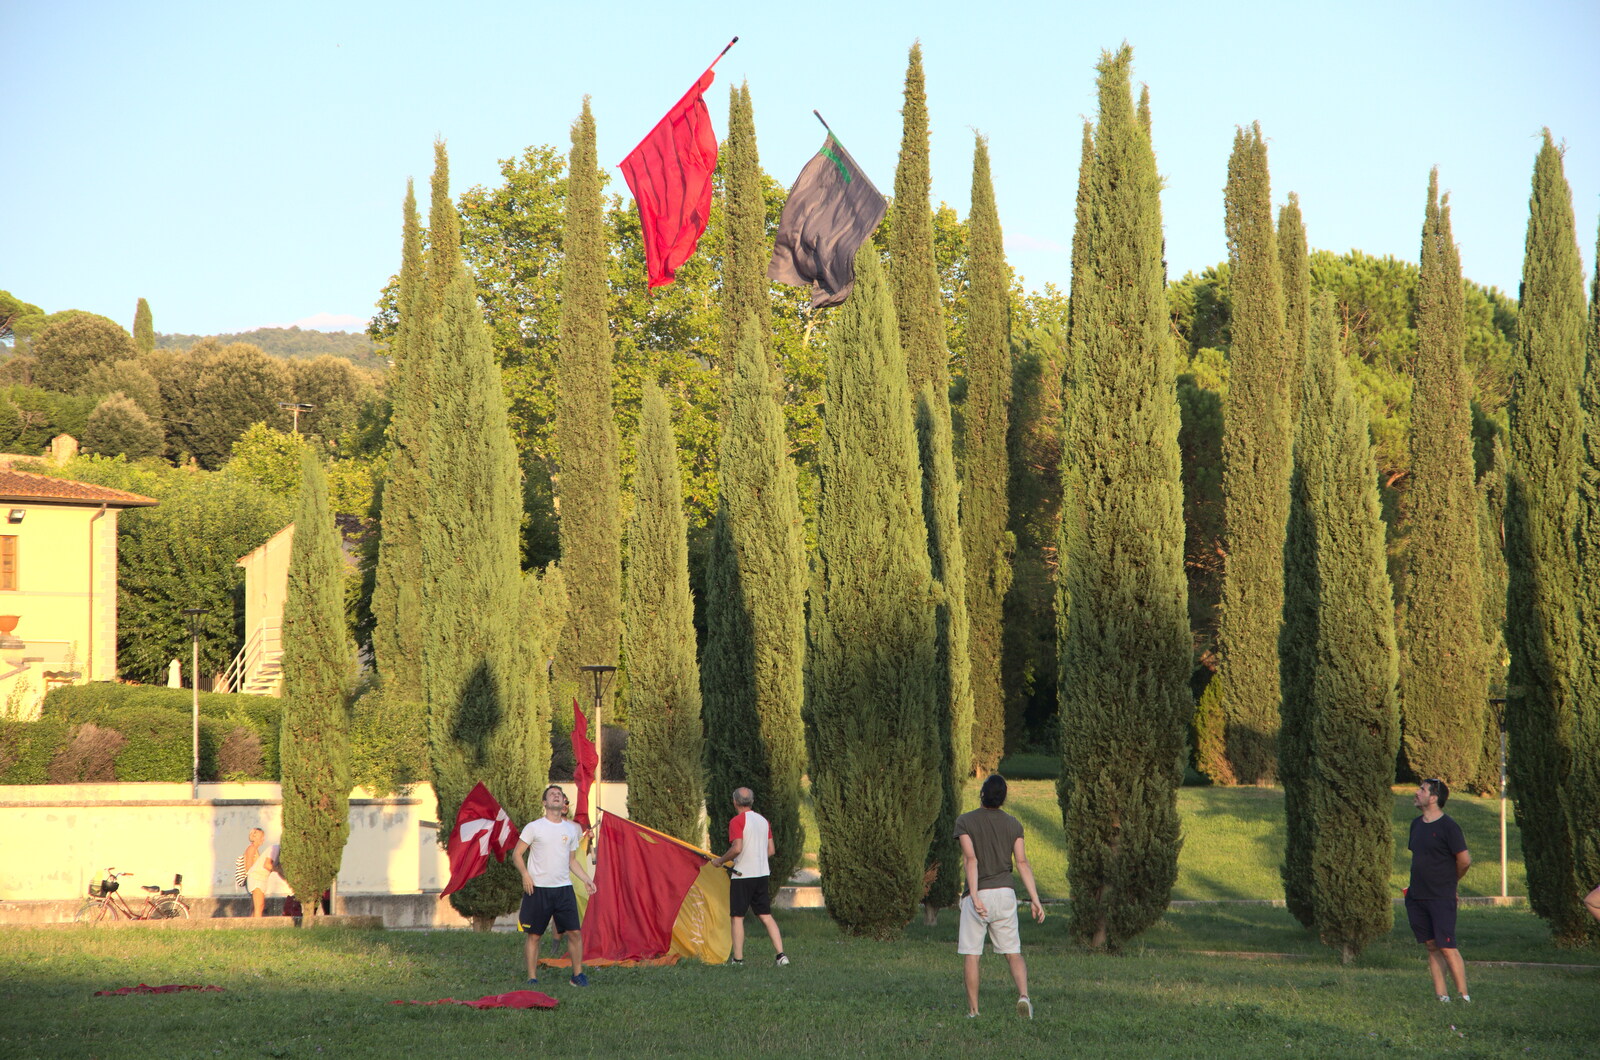 The Flags of Arezzo, Tuscany, Italy - 28th August 2022: There's some flag-hurling practice